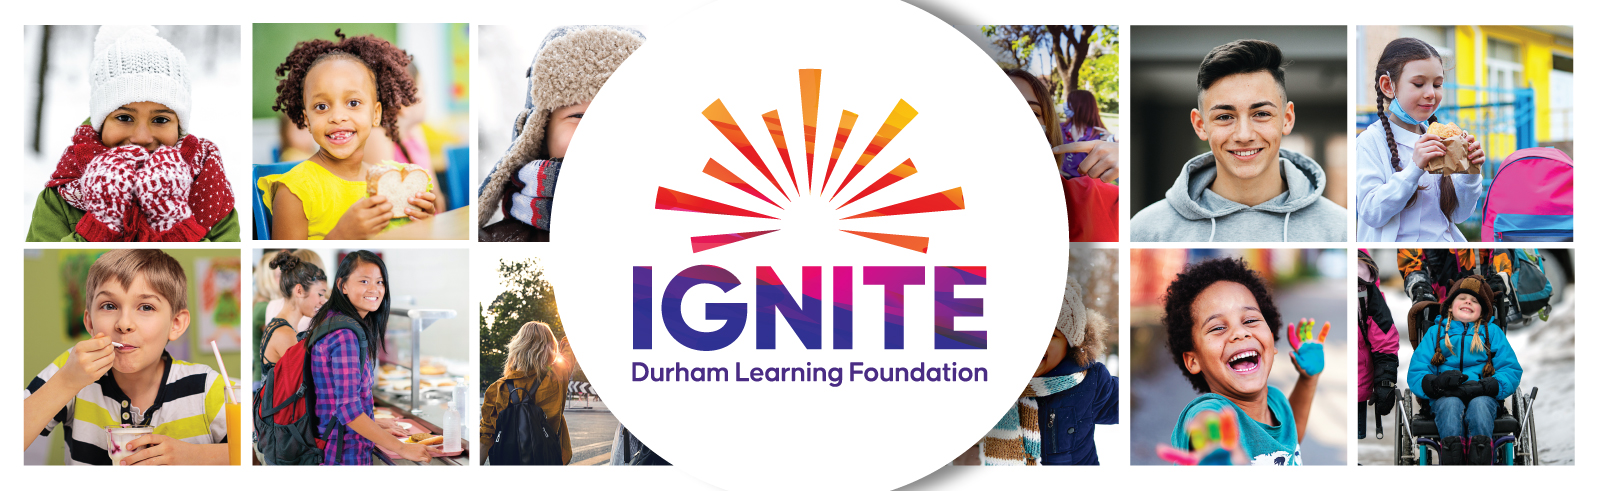 students highlighted in circles - Ignite Durham Learning Foundation